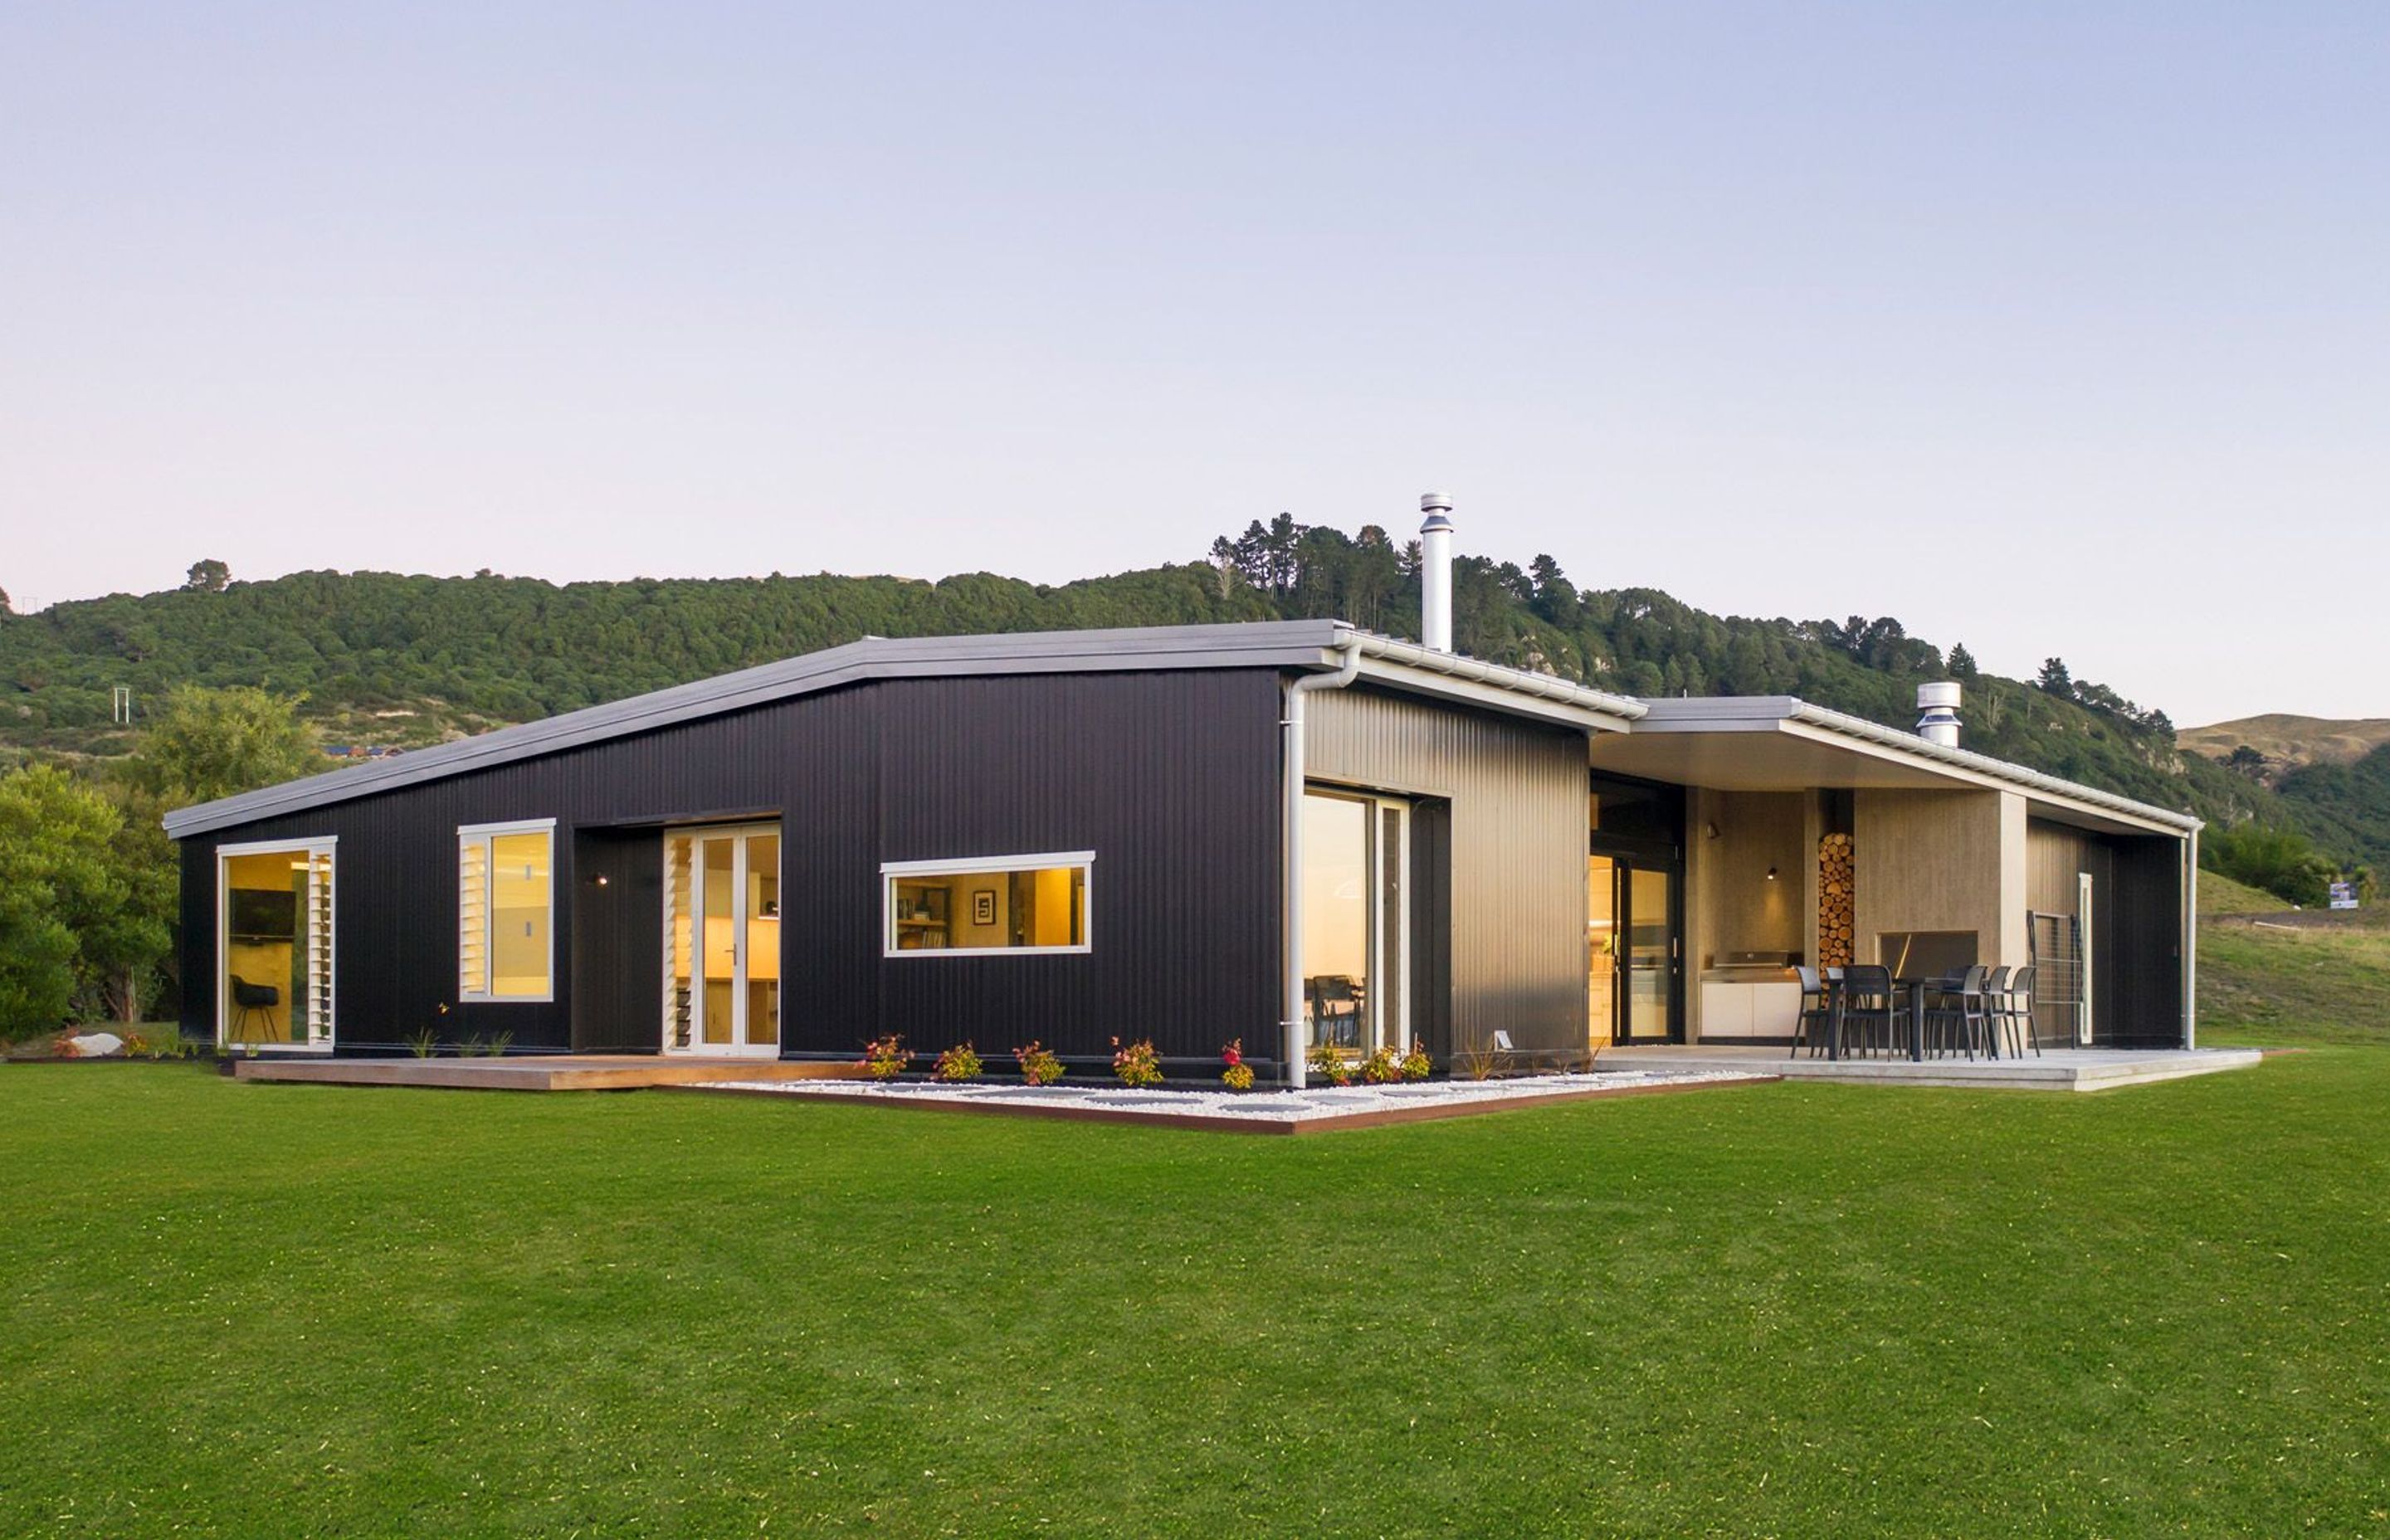 Designed by Malcolm Taylor of Xsite Architects, Kinloch House is clad and roofed in prefabricated Metalcraft panels for the ultimate insulation and durability. Photograph: ArchiPro.